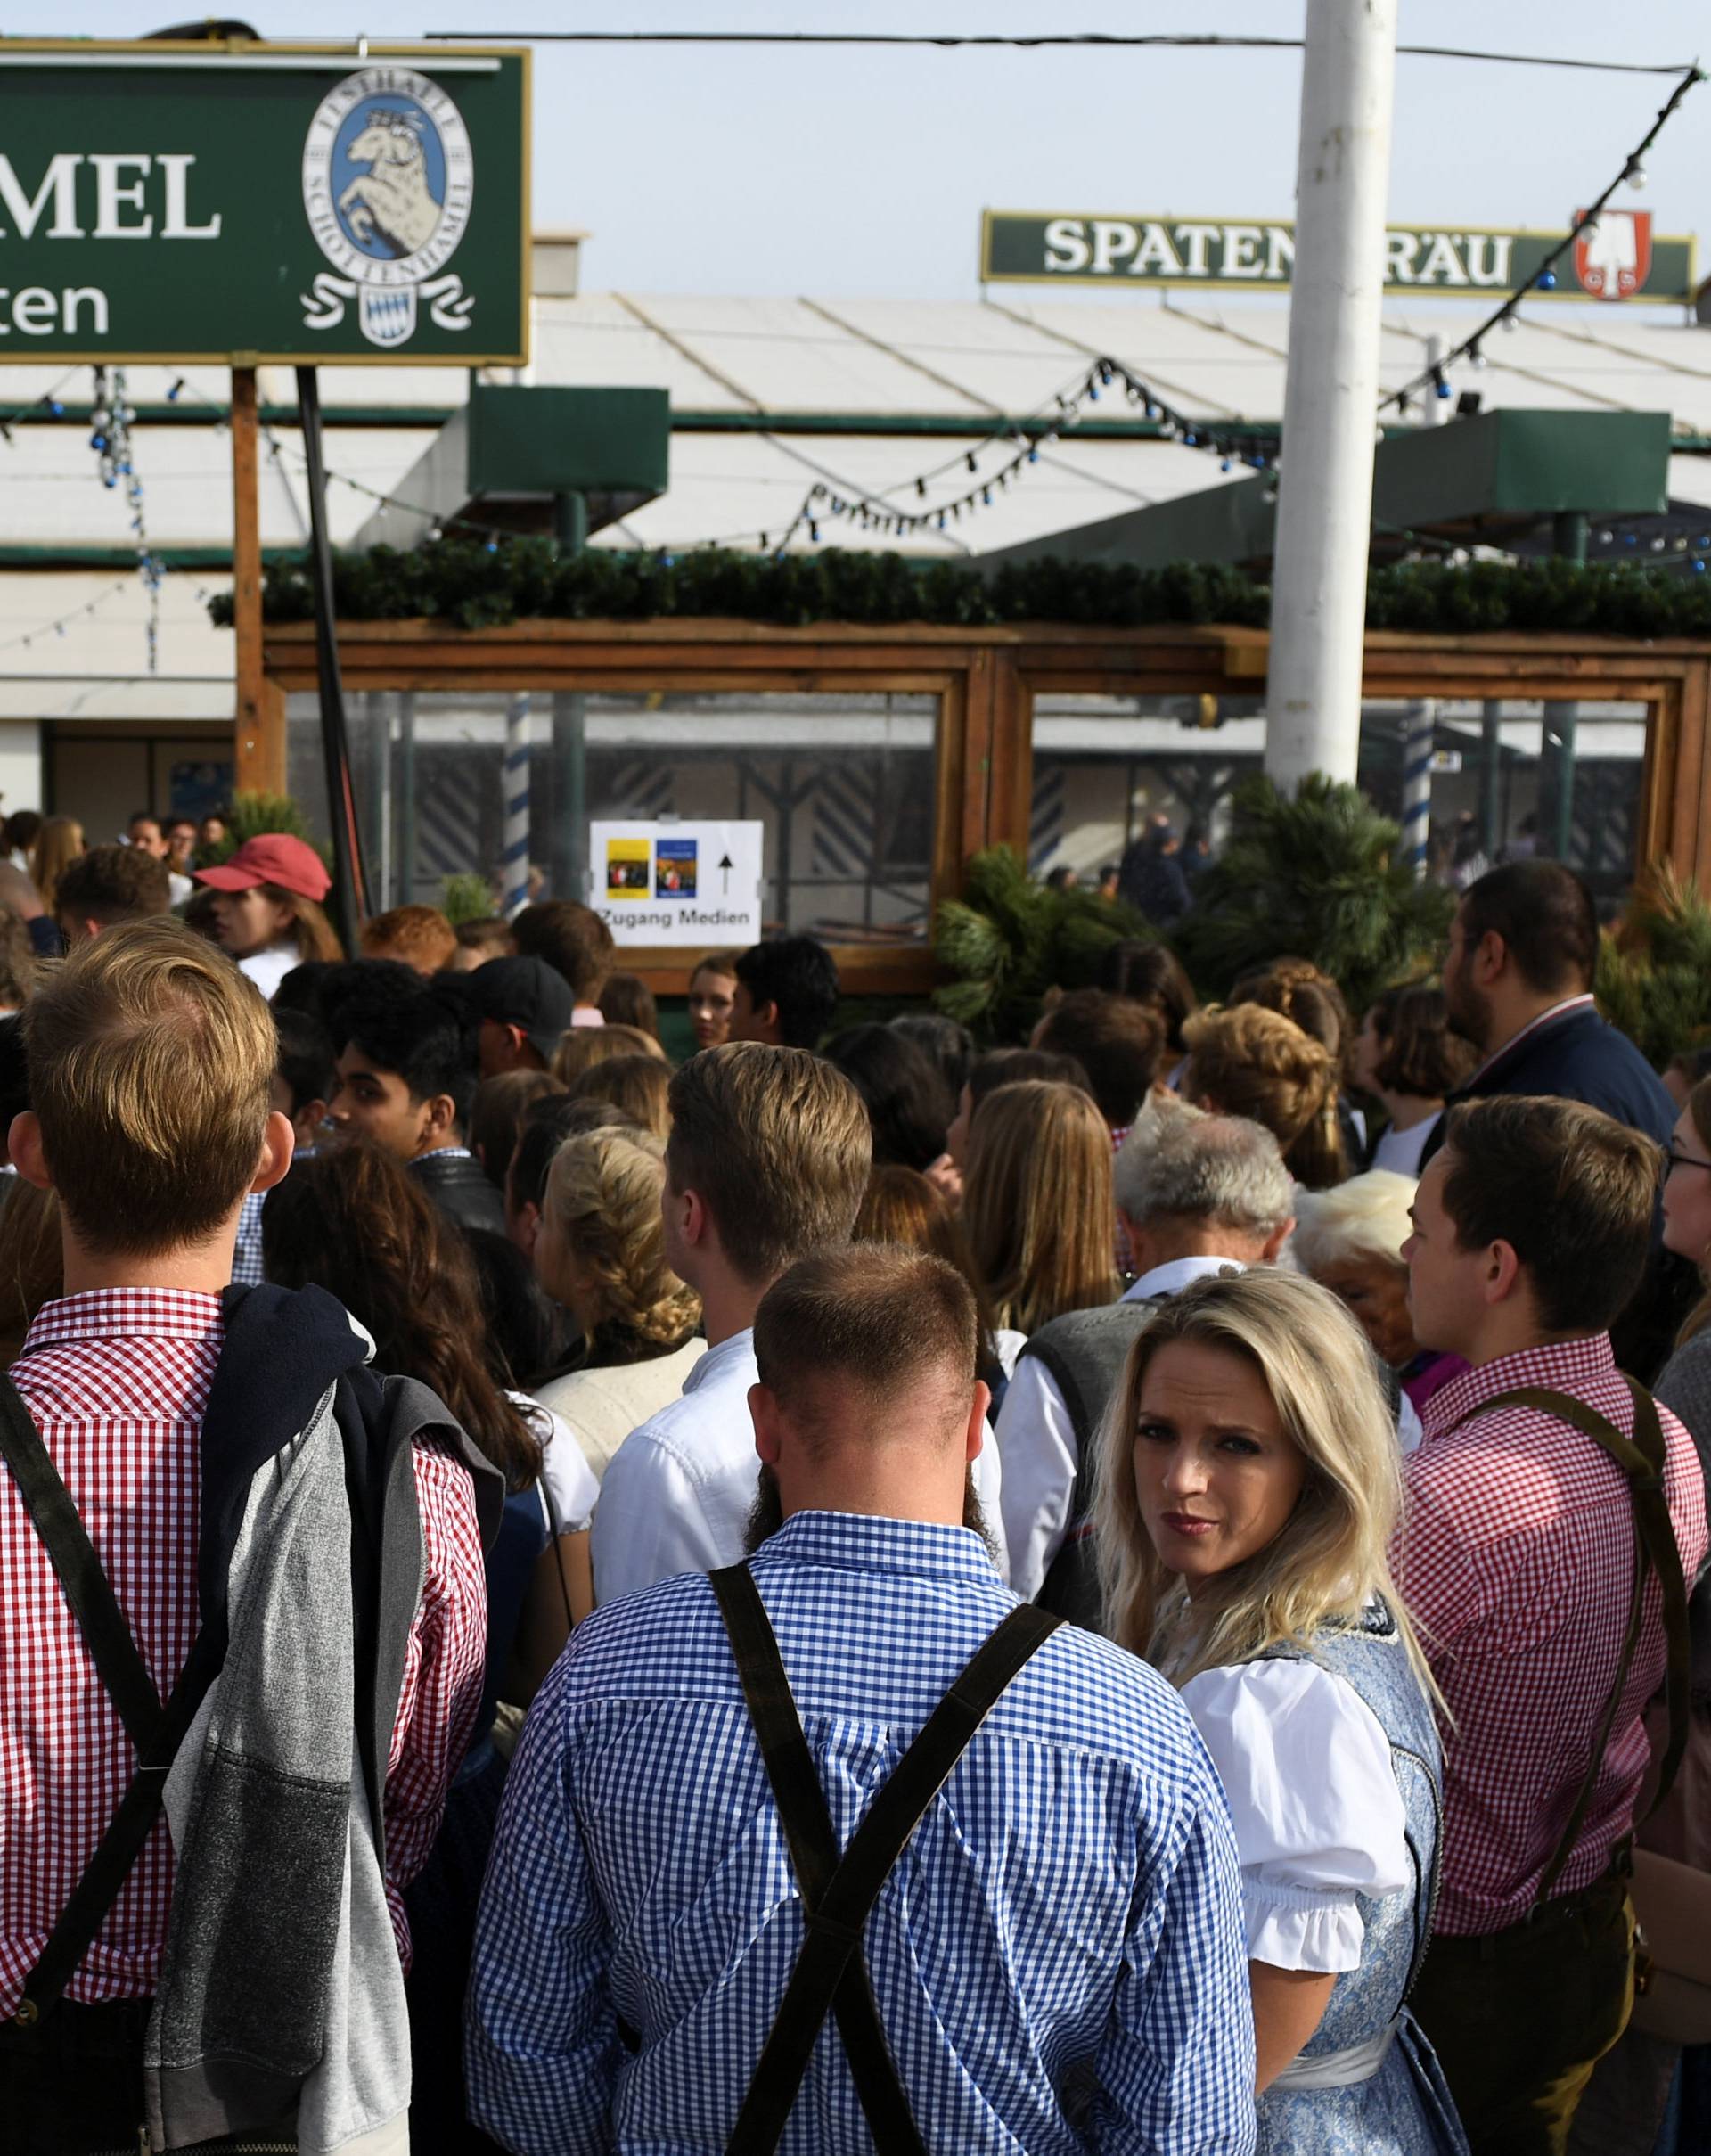 Visitors queue as they wait to enter the tent at the opening day of the 185th Oktoberfest in Munich